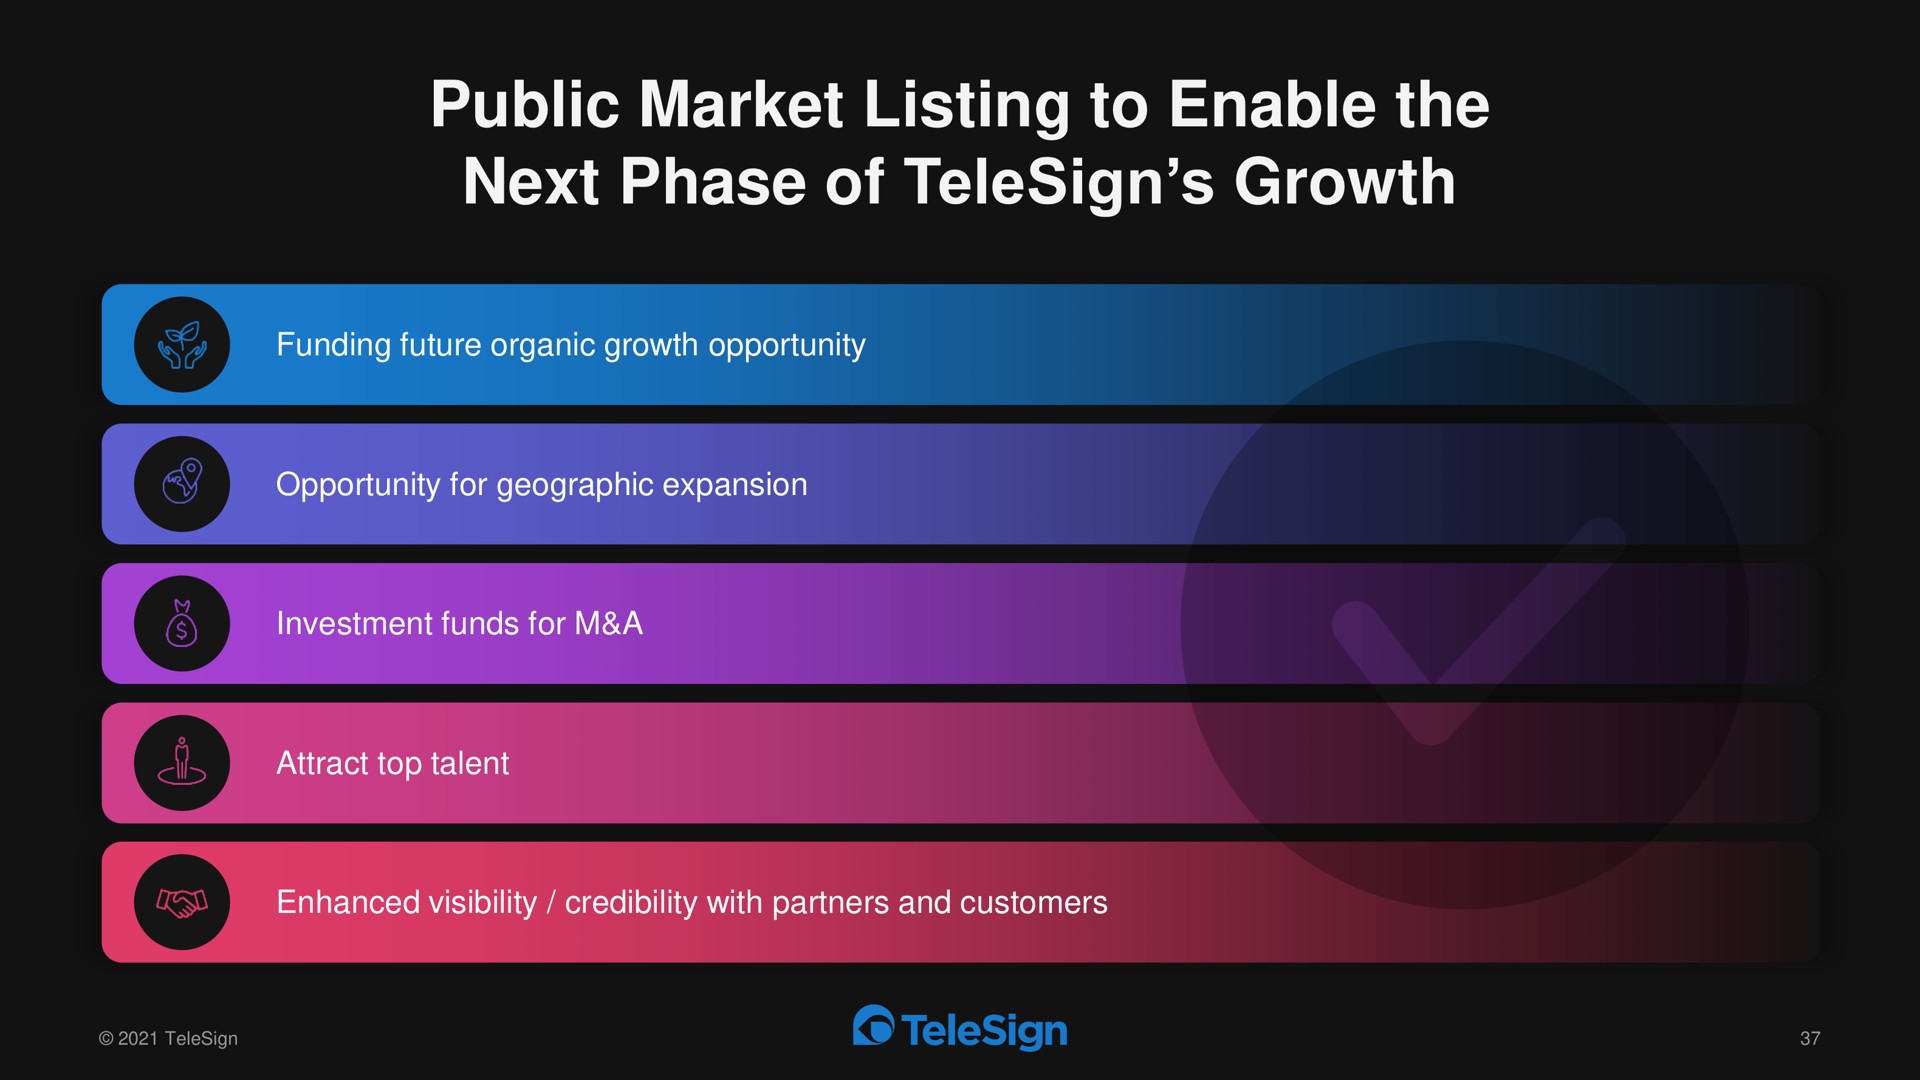 public market listing to enable the next phase of growth | TeleSign